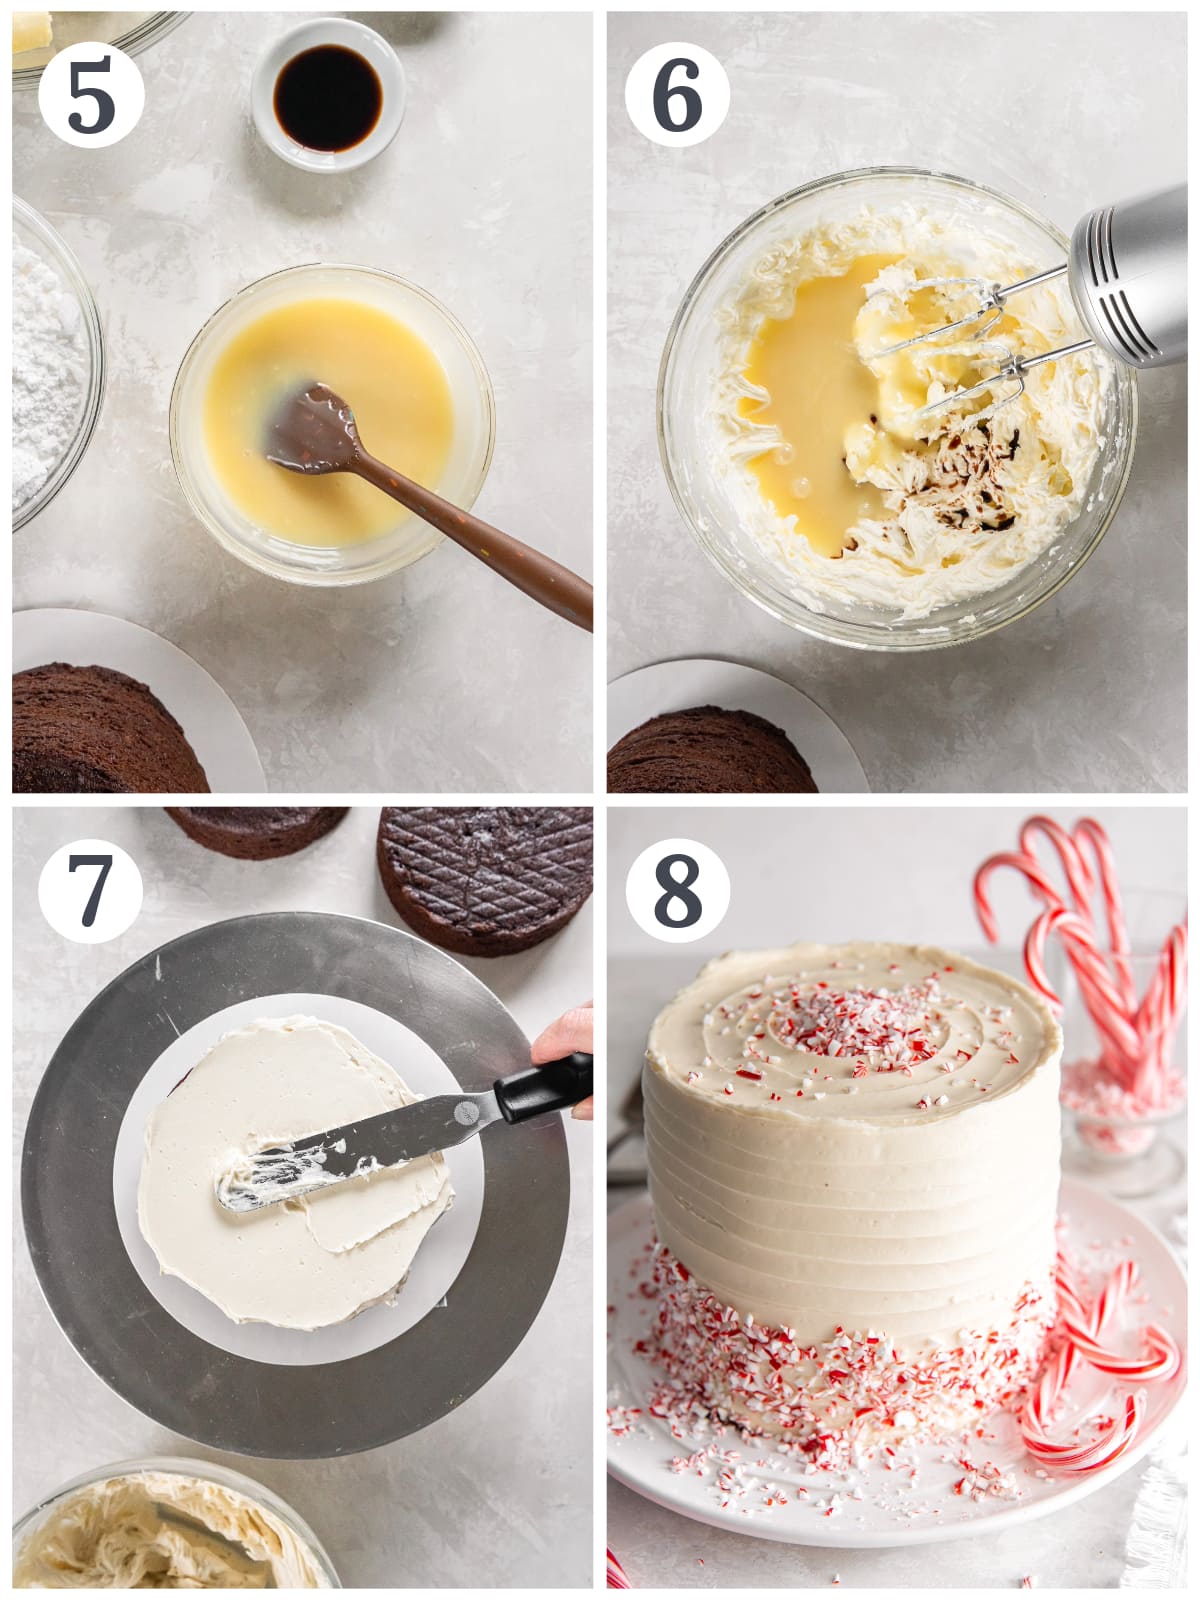 photo collage demonstrating how to make white chocolate buttercream frosting in a mixing bowl and assemble a layered cake.